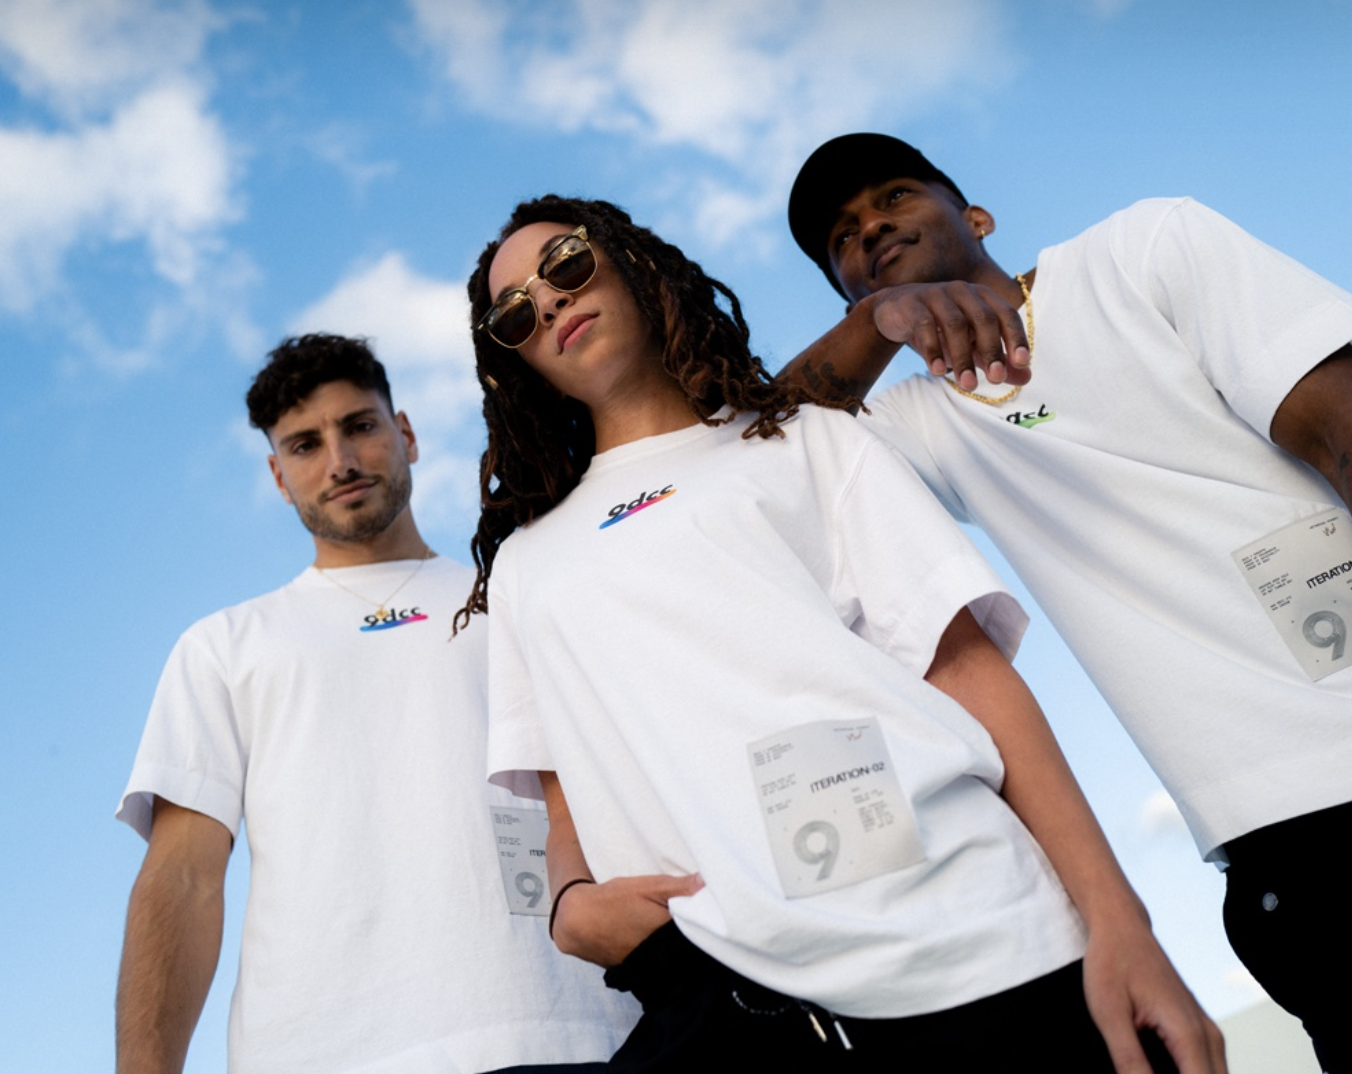 brand photo of 3 people wearing 9dcc ITERATION-02 t-shirts.png